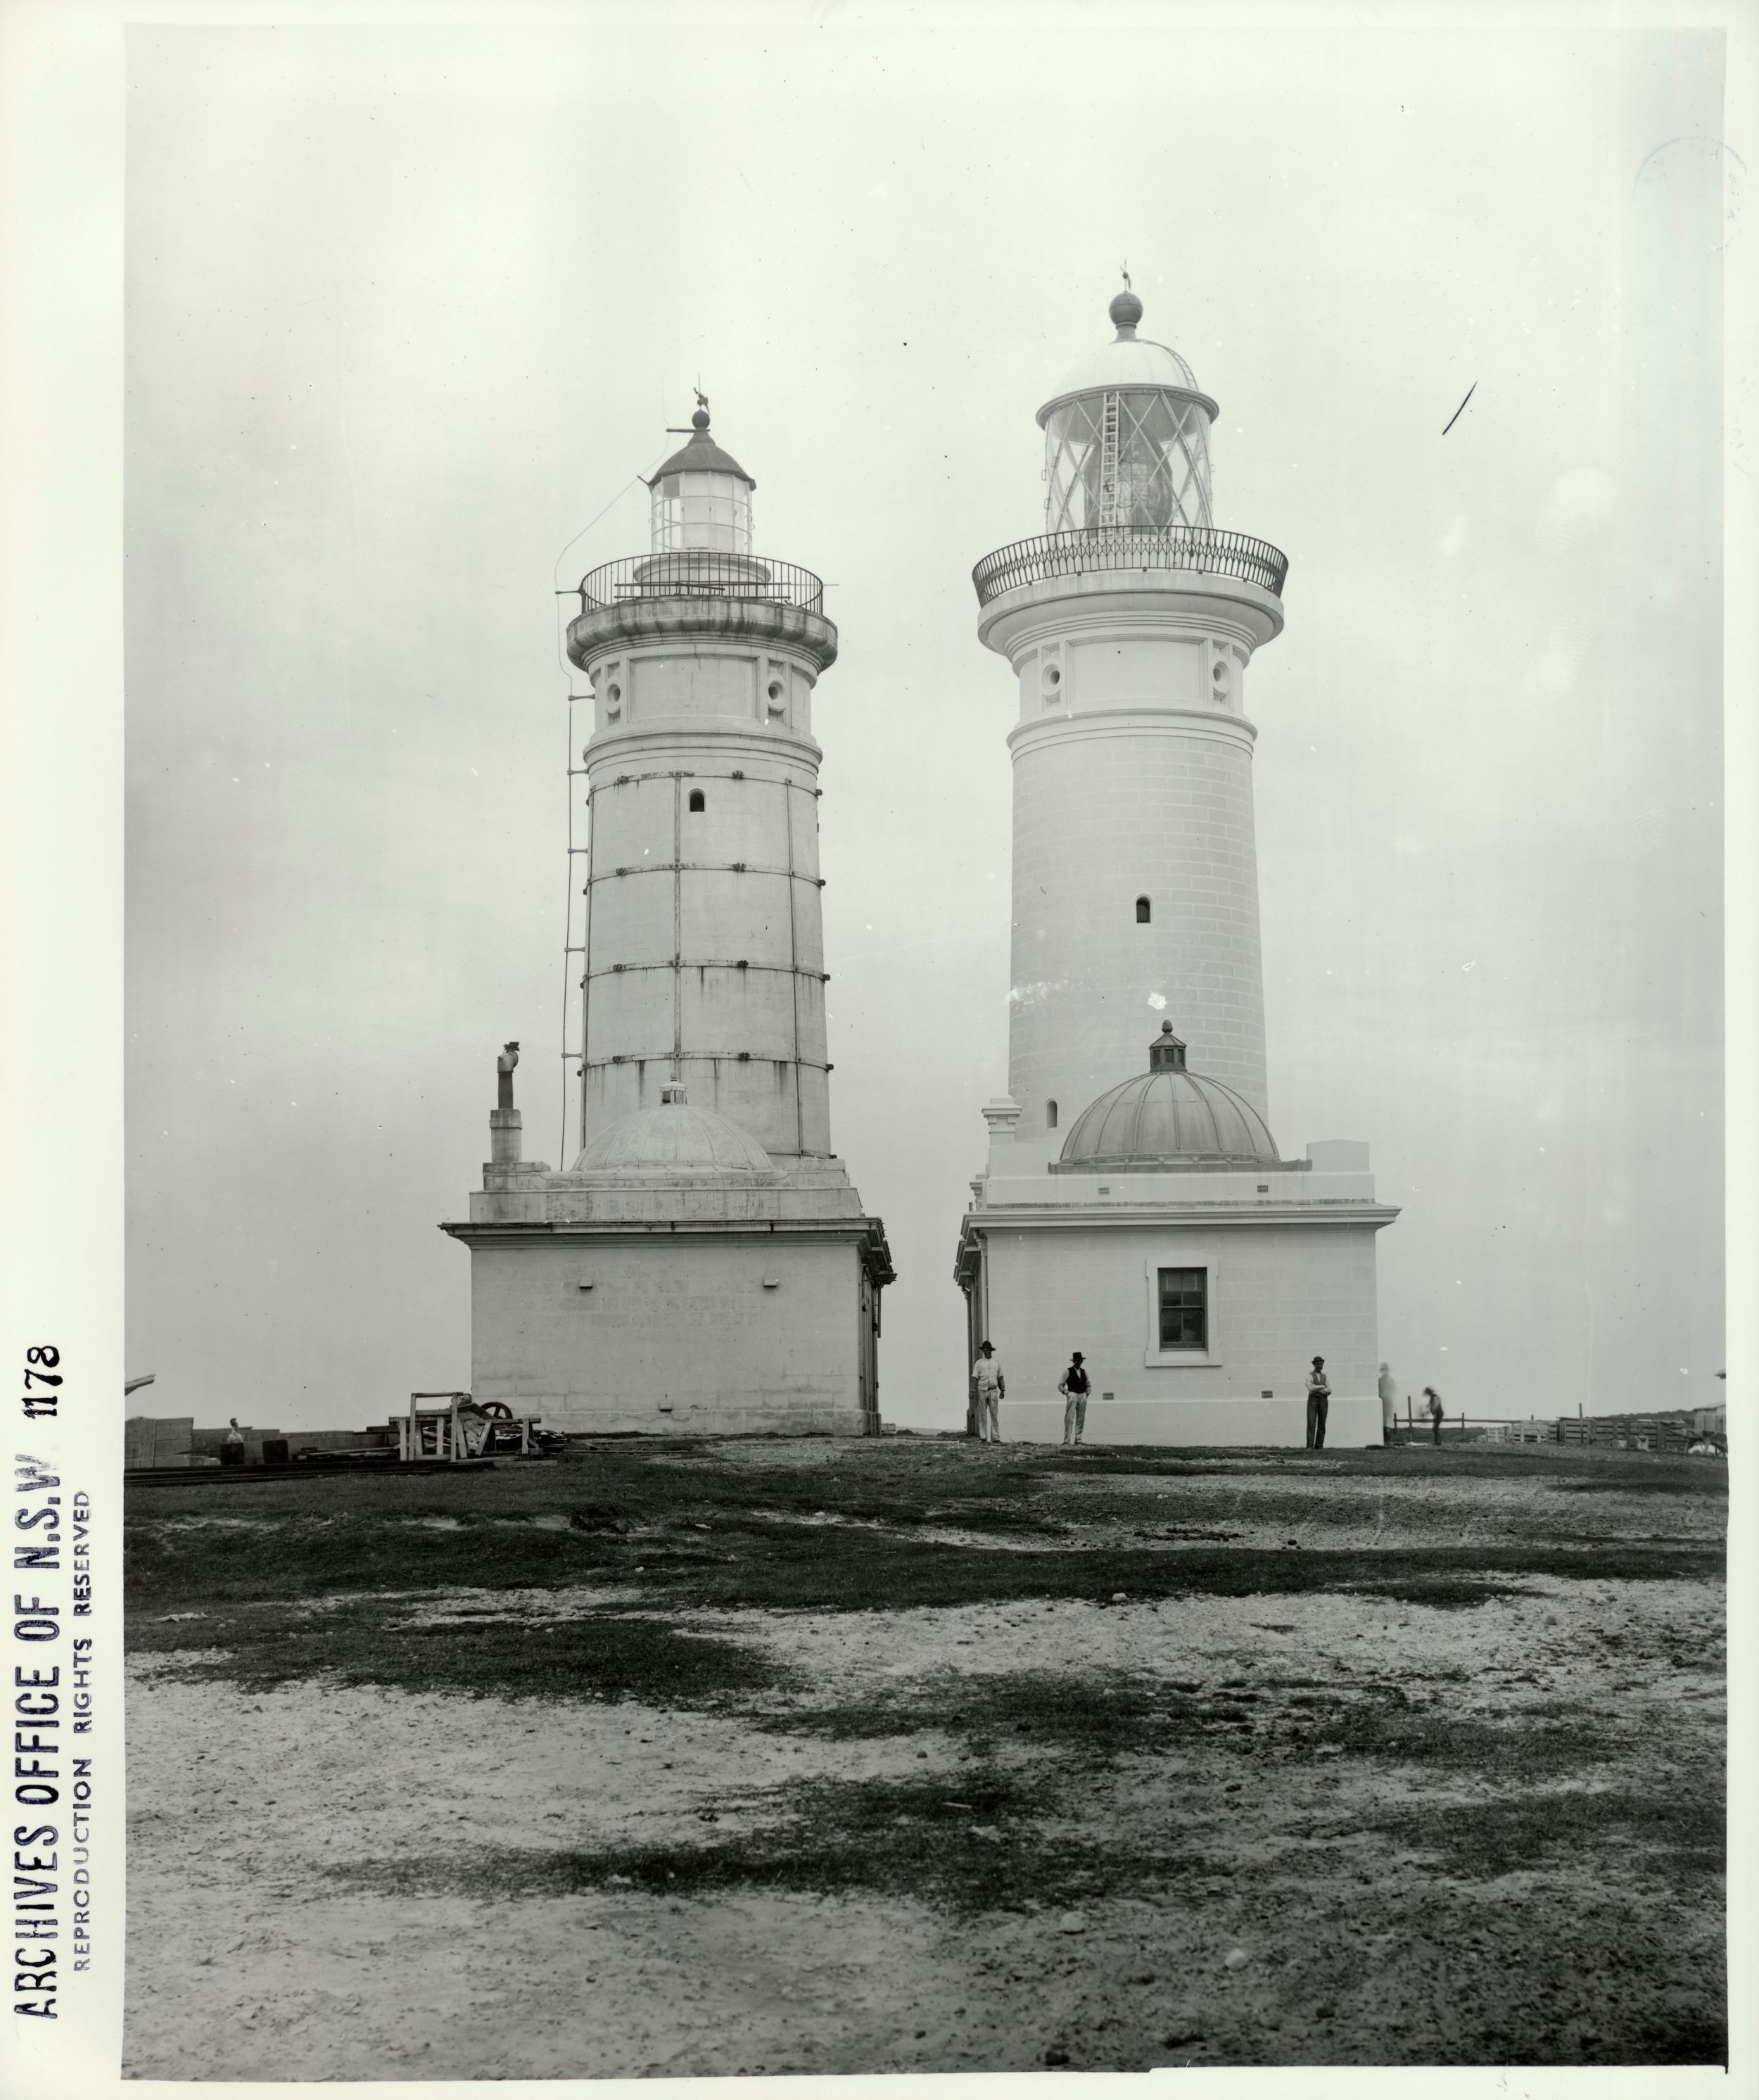 Two lighthouses side by side at South Head, Sydney